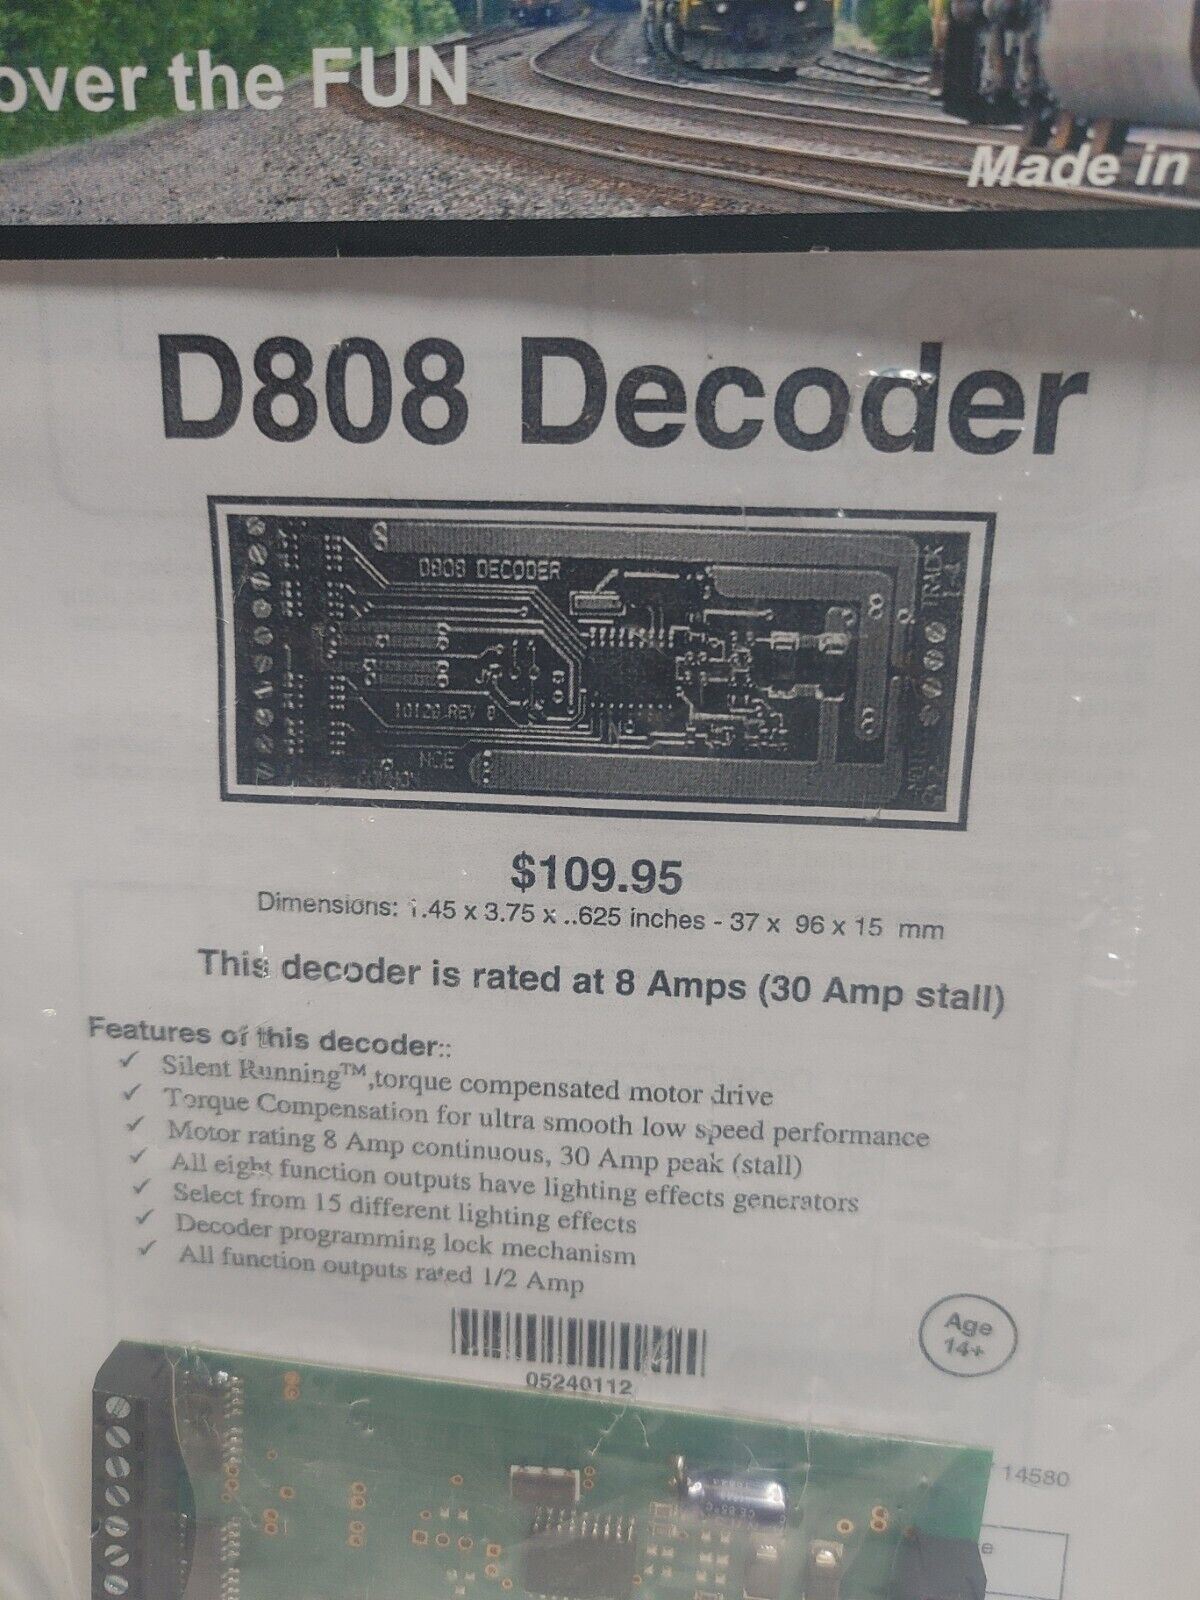 NCE 0112 D808-SR DECODER 8-FUNCTION 8 AMP - New in Package